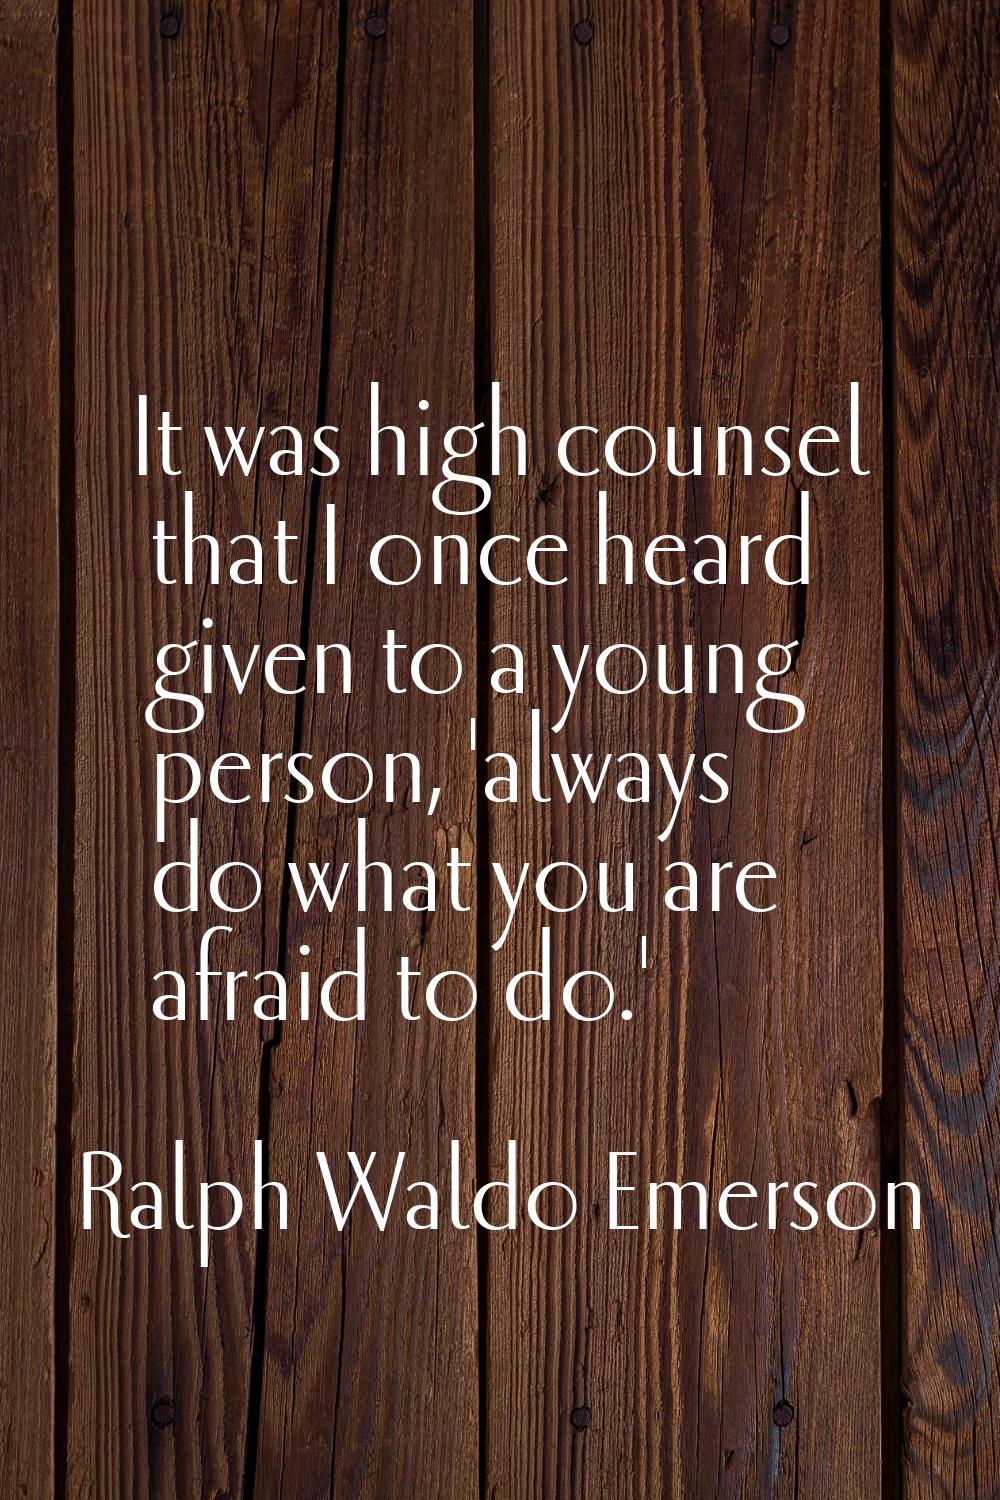 It was high counsel that I once heard given to a young person, 'always do what you are afraid to do